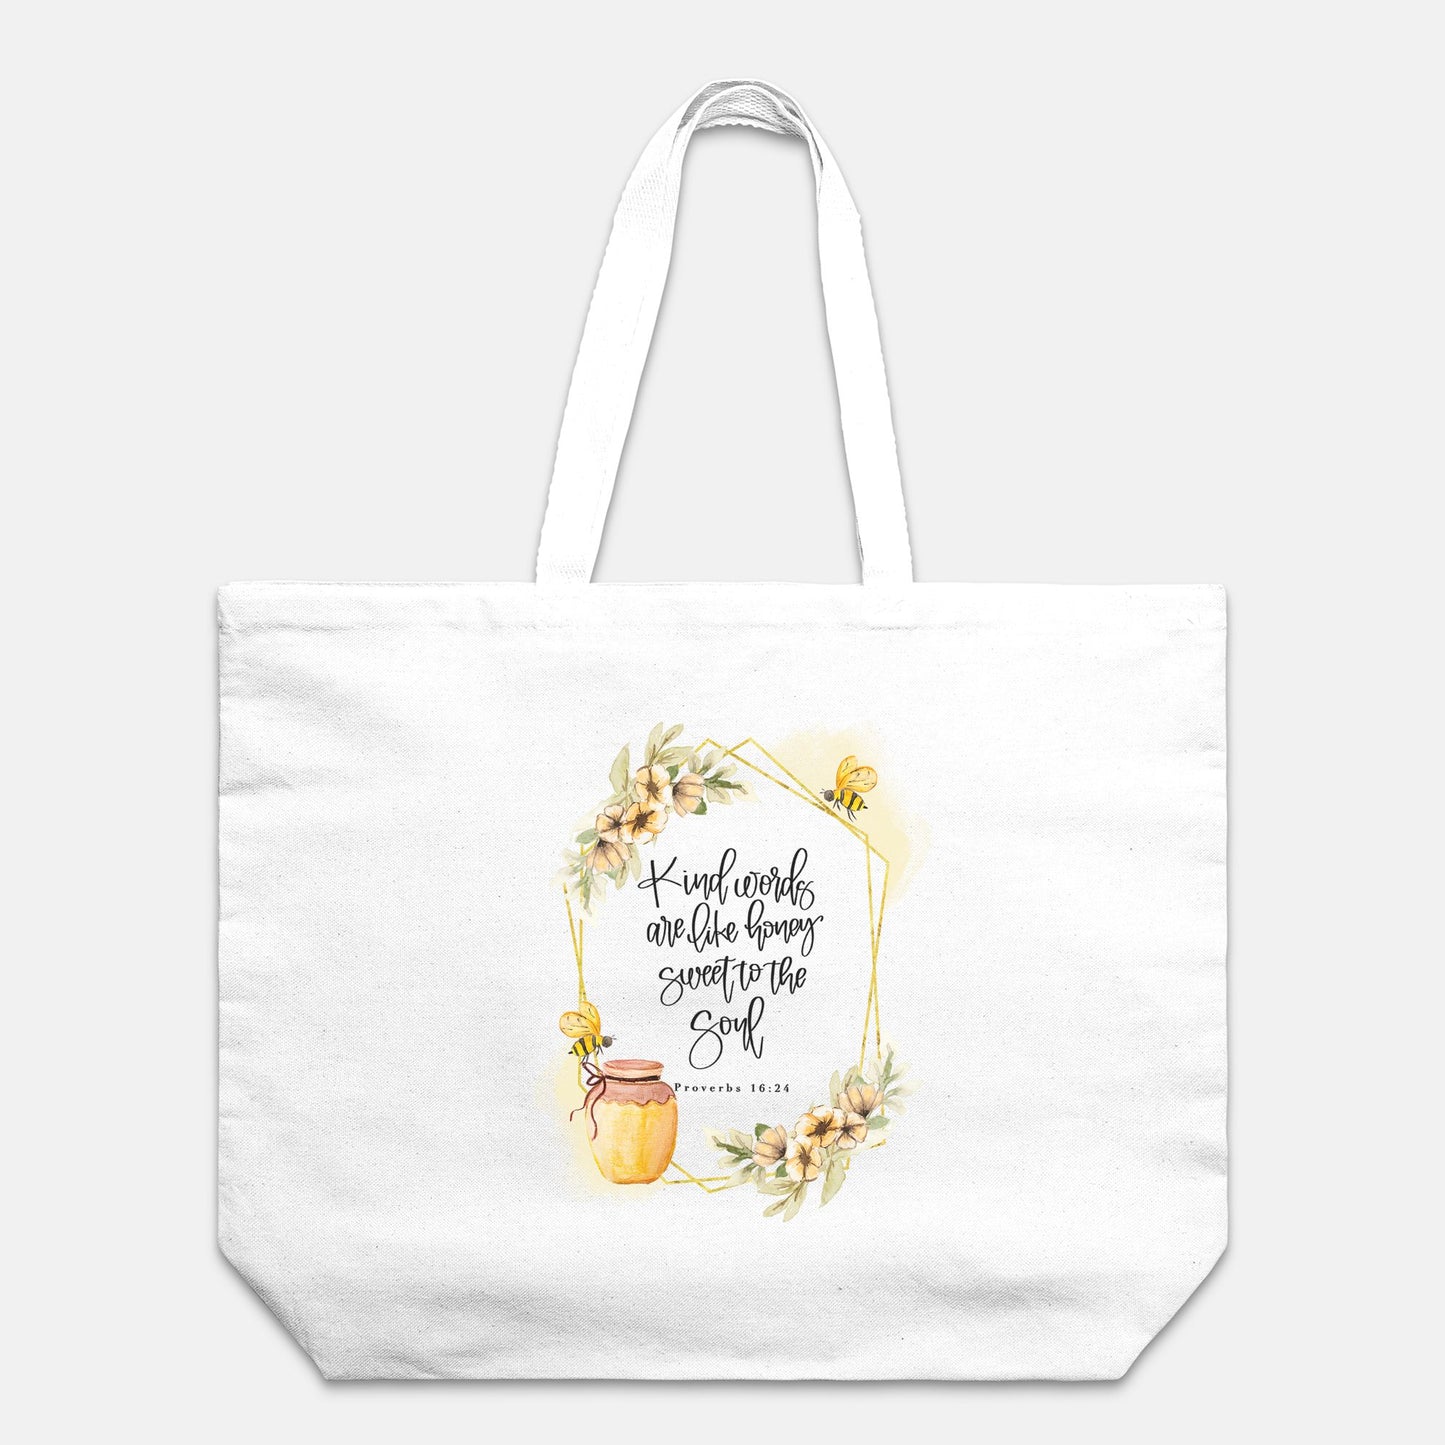 Proverbs 16:24 Cotton Canvas Oversized Tote